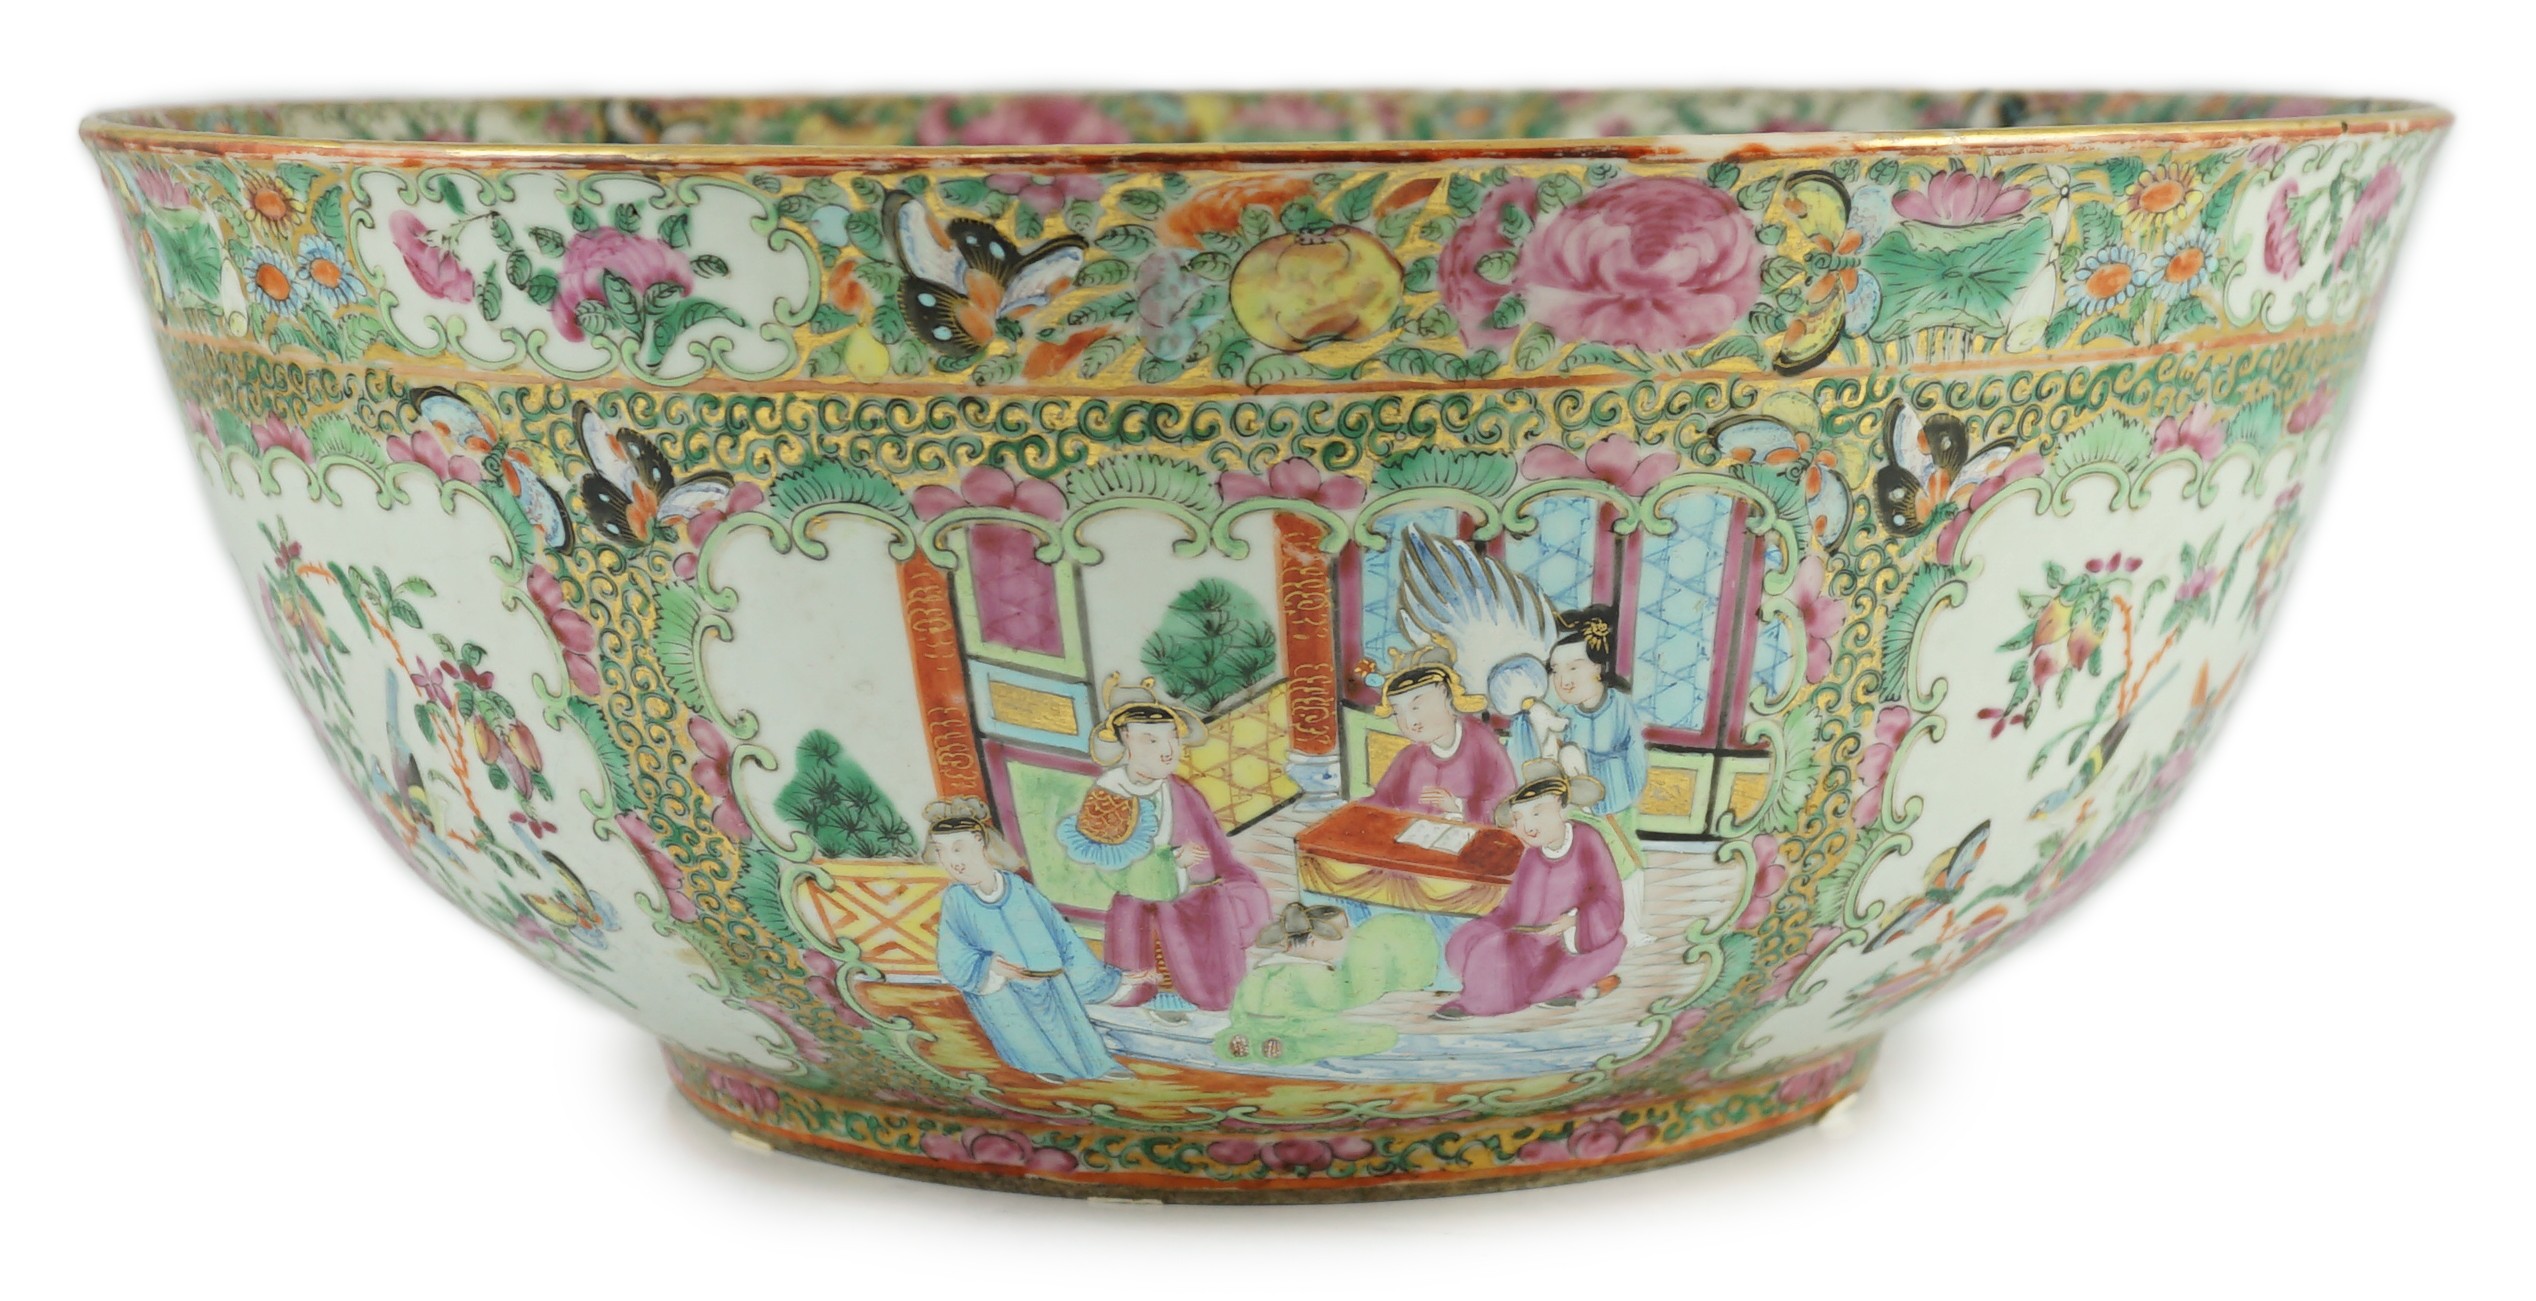 A large Chinese Canton (Guangzhou) decorated famille rose bowl, c.1830-50, 39.2cm diameter                                                                                                                                  